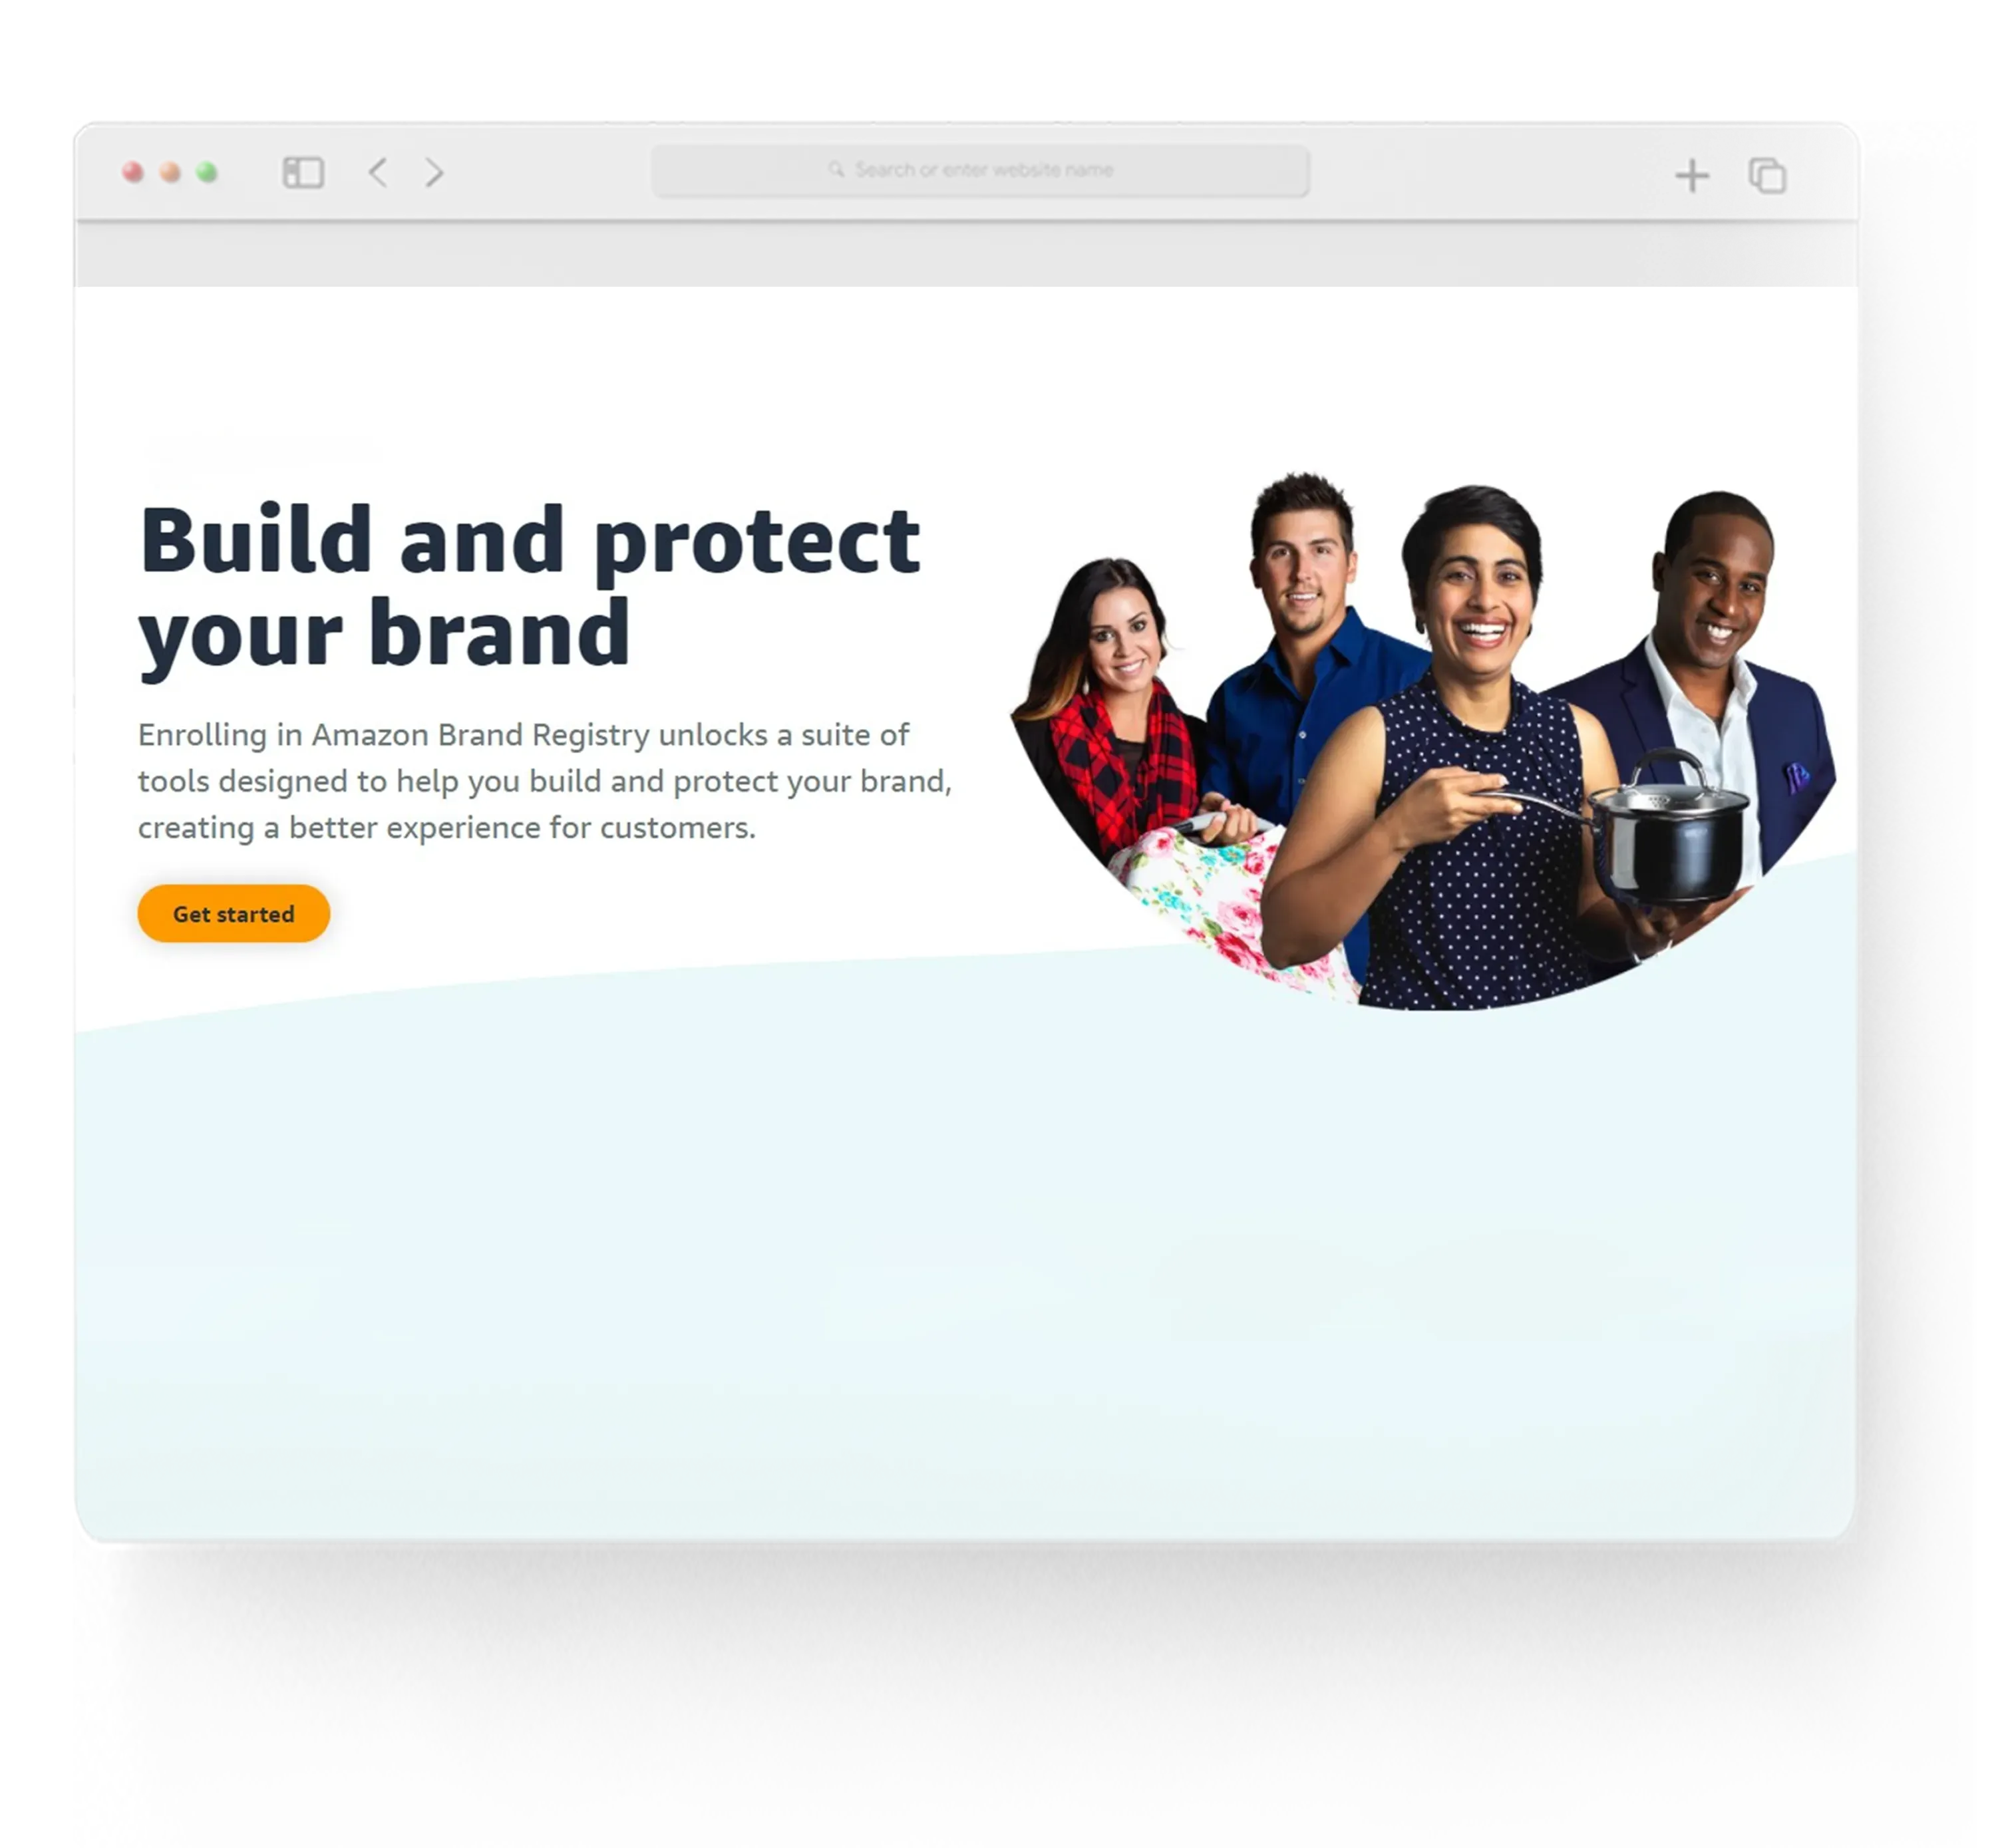 Amazon Brand Registration landing page opened on web browser